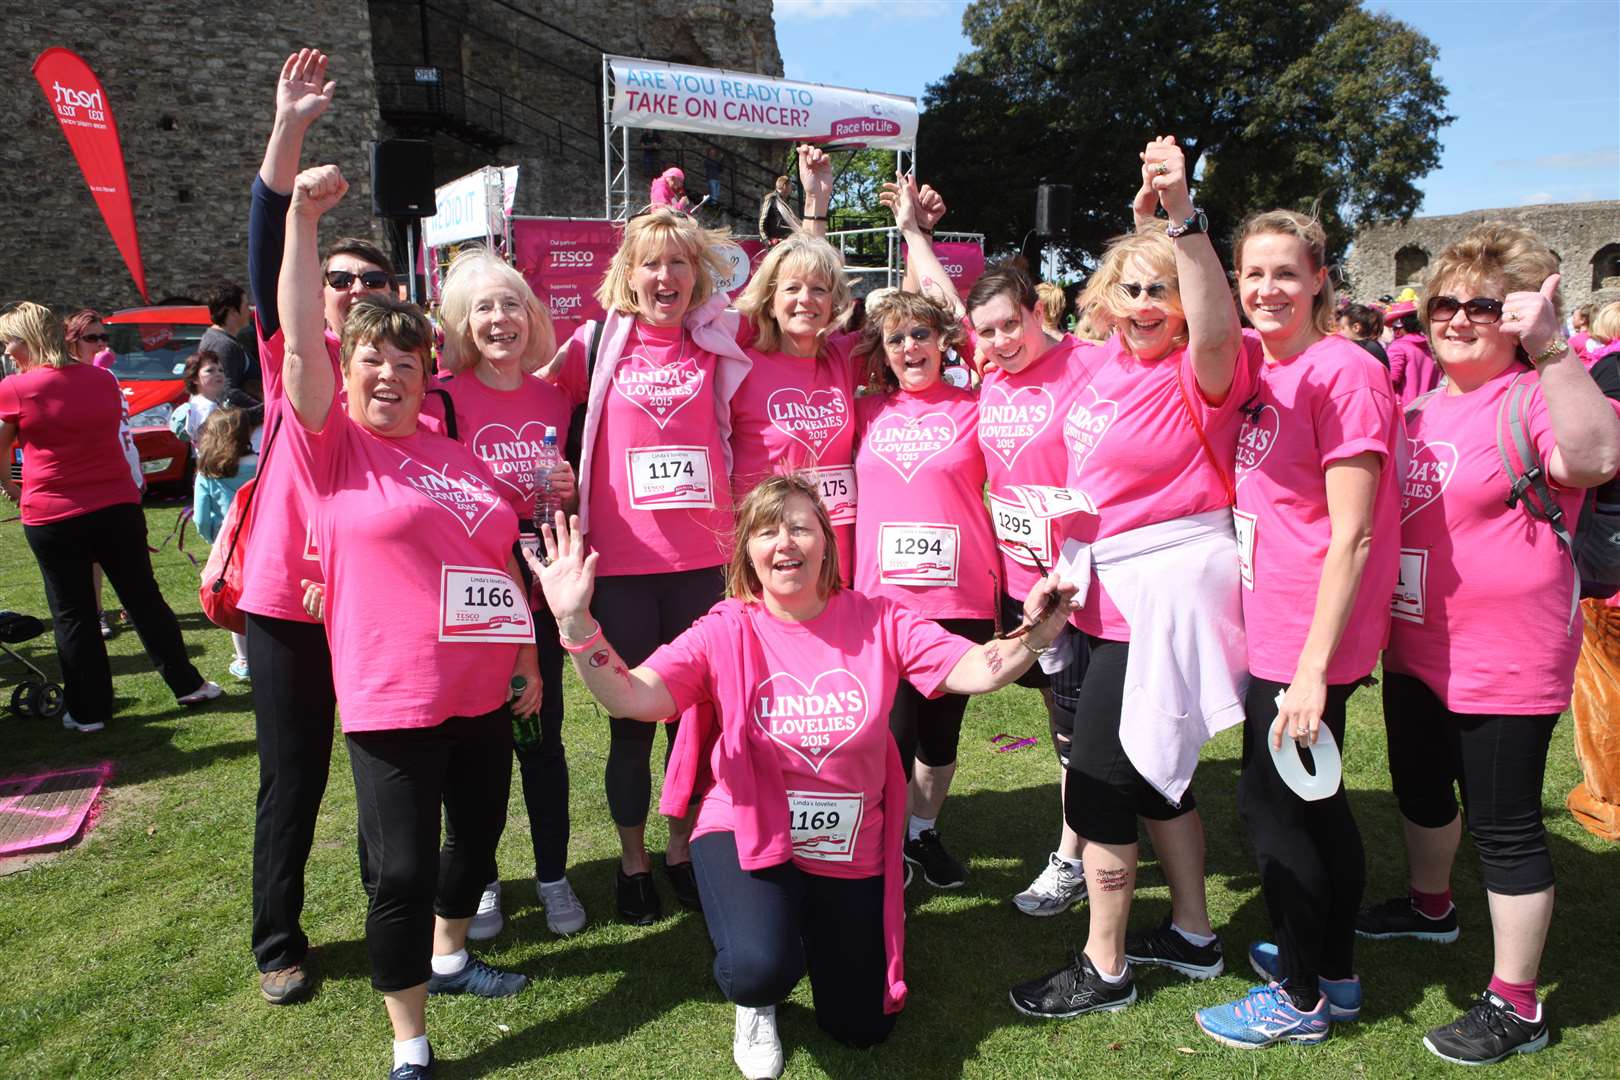 Linda's Lovelies took part in the Race for Life in Rochester